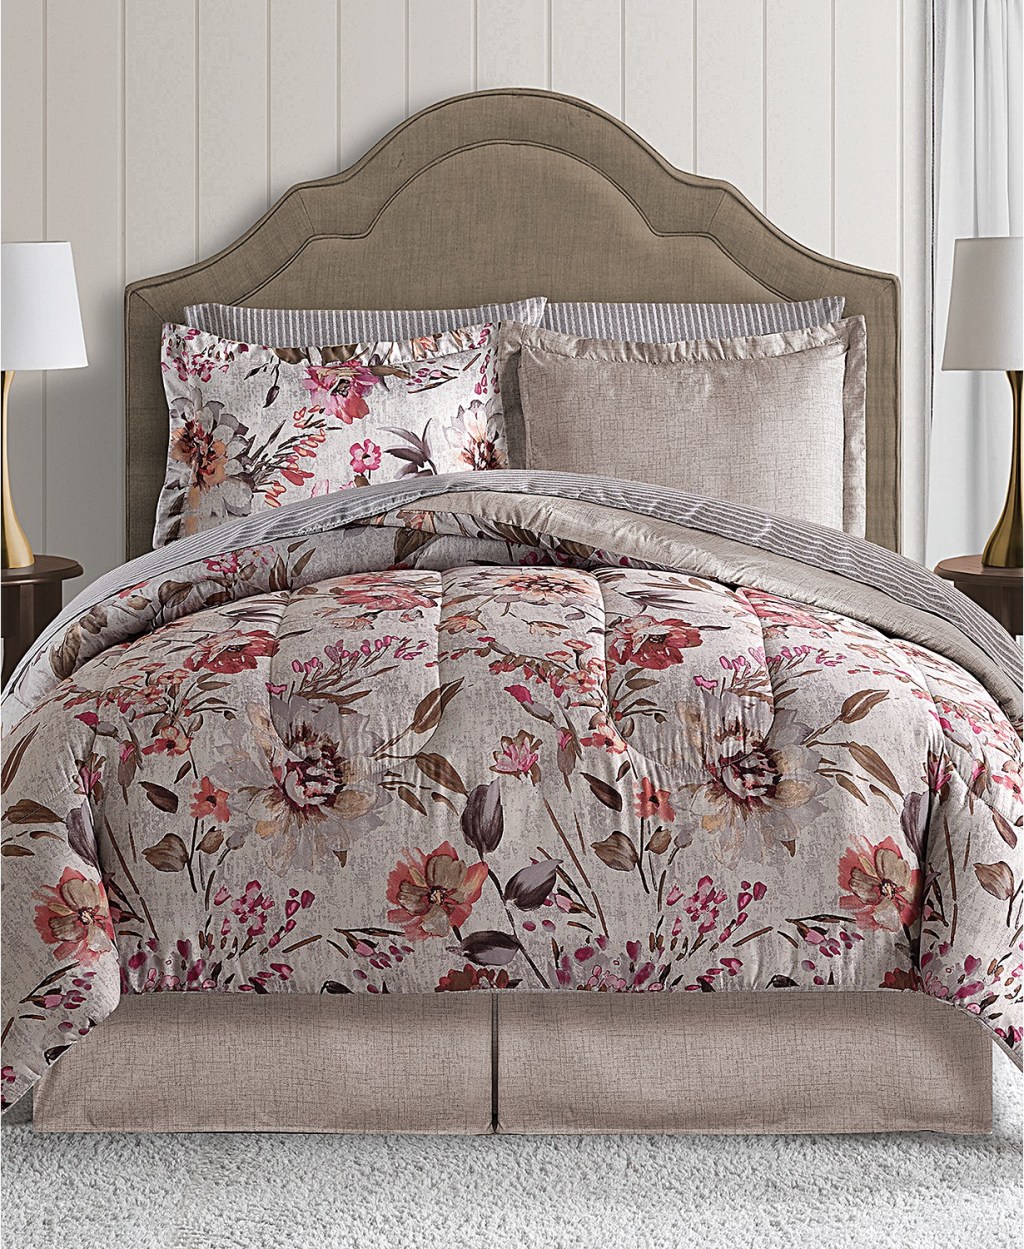 Macy’0 Reversible 8-Piece Comforter Set Just $27.99 (Regularly $100) – ALL Sizes - Hip2Save